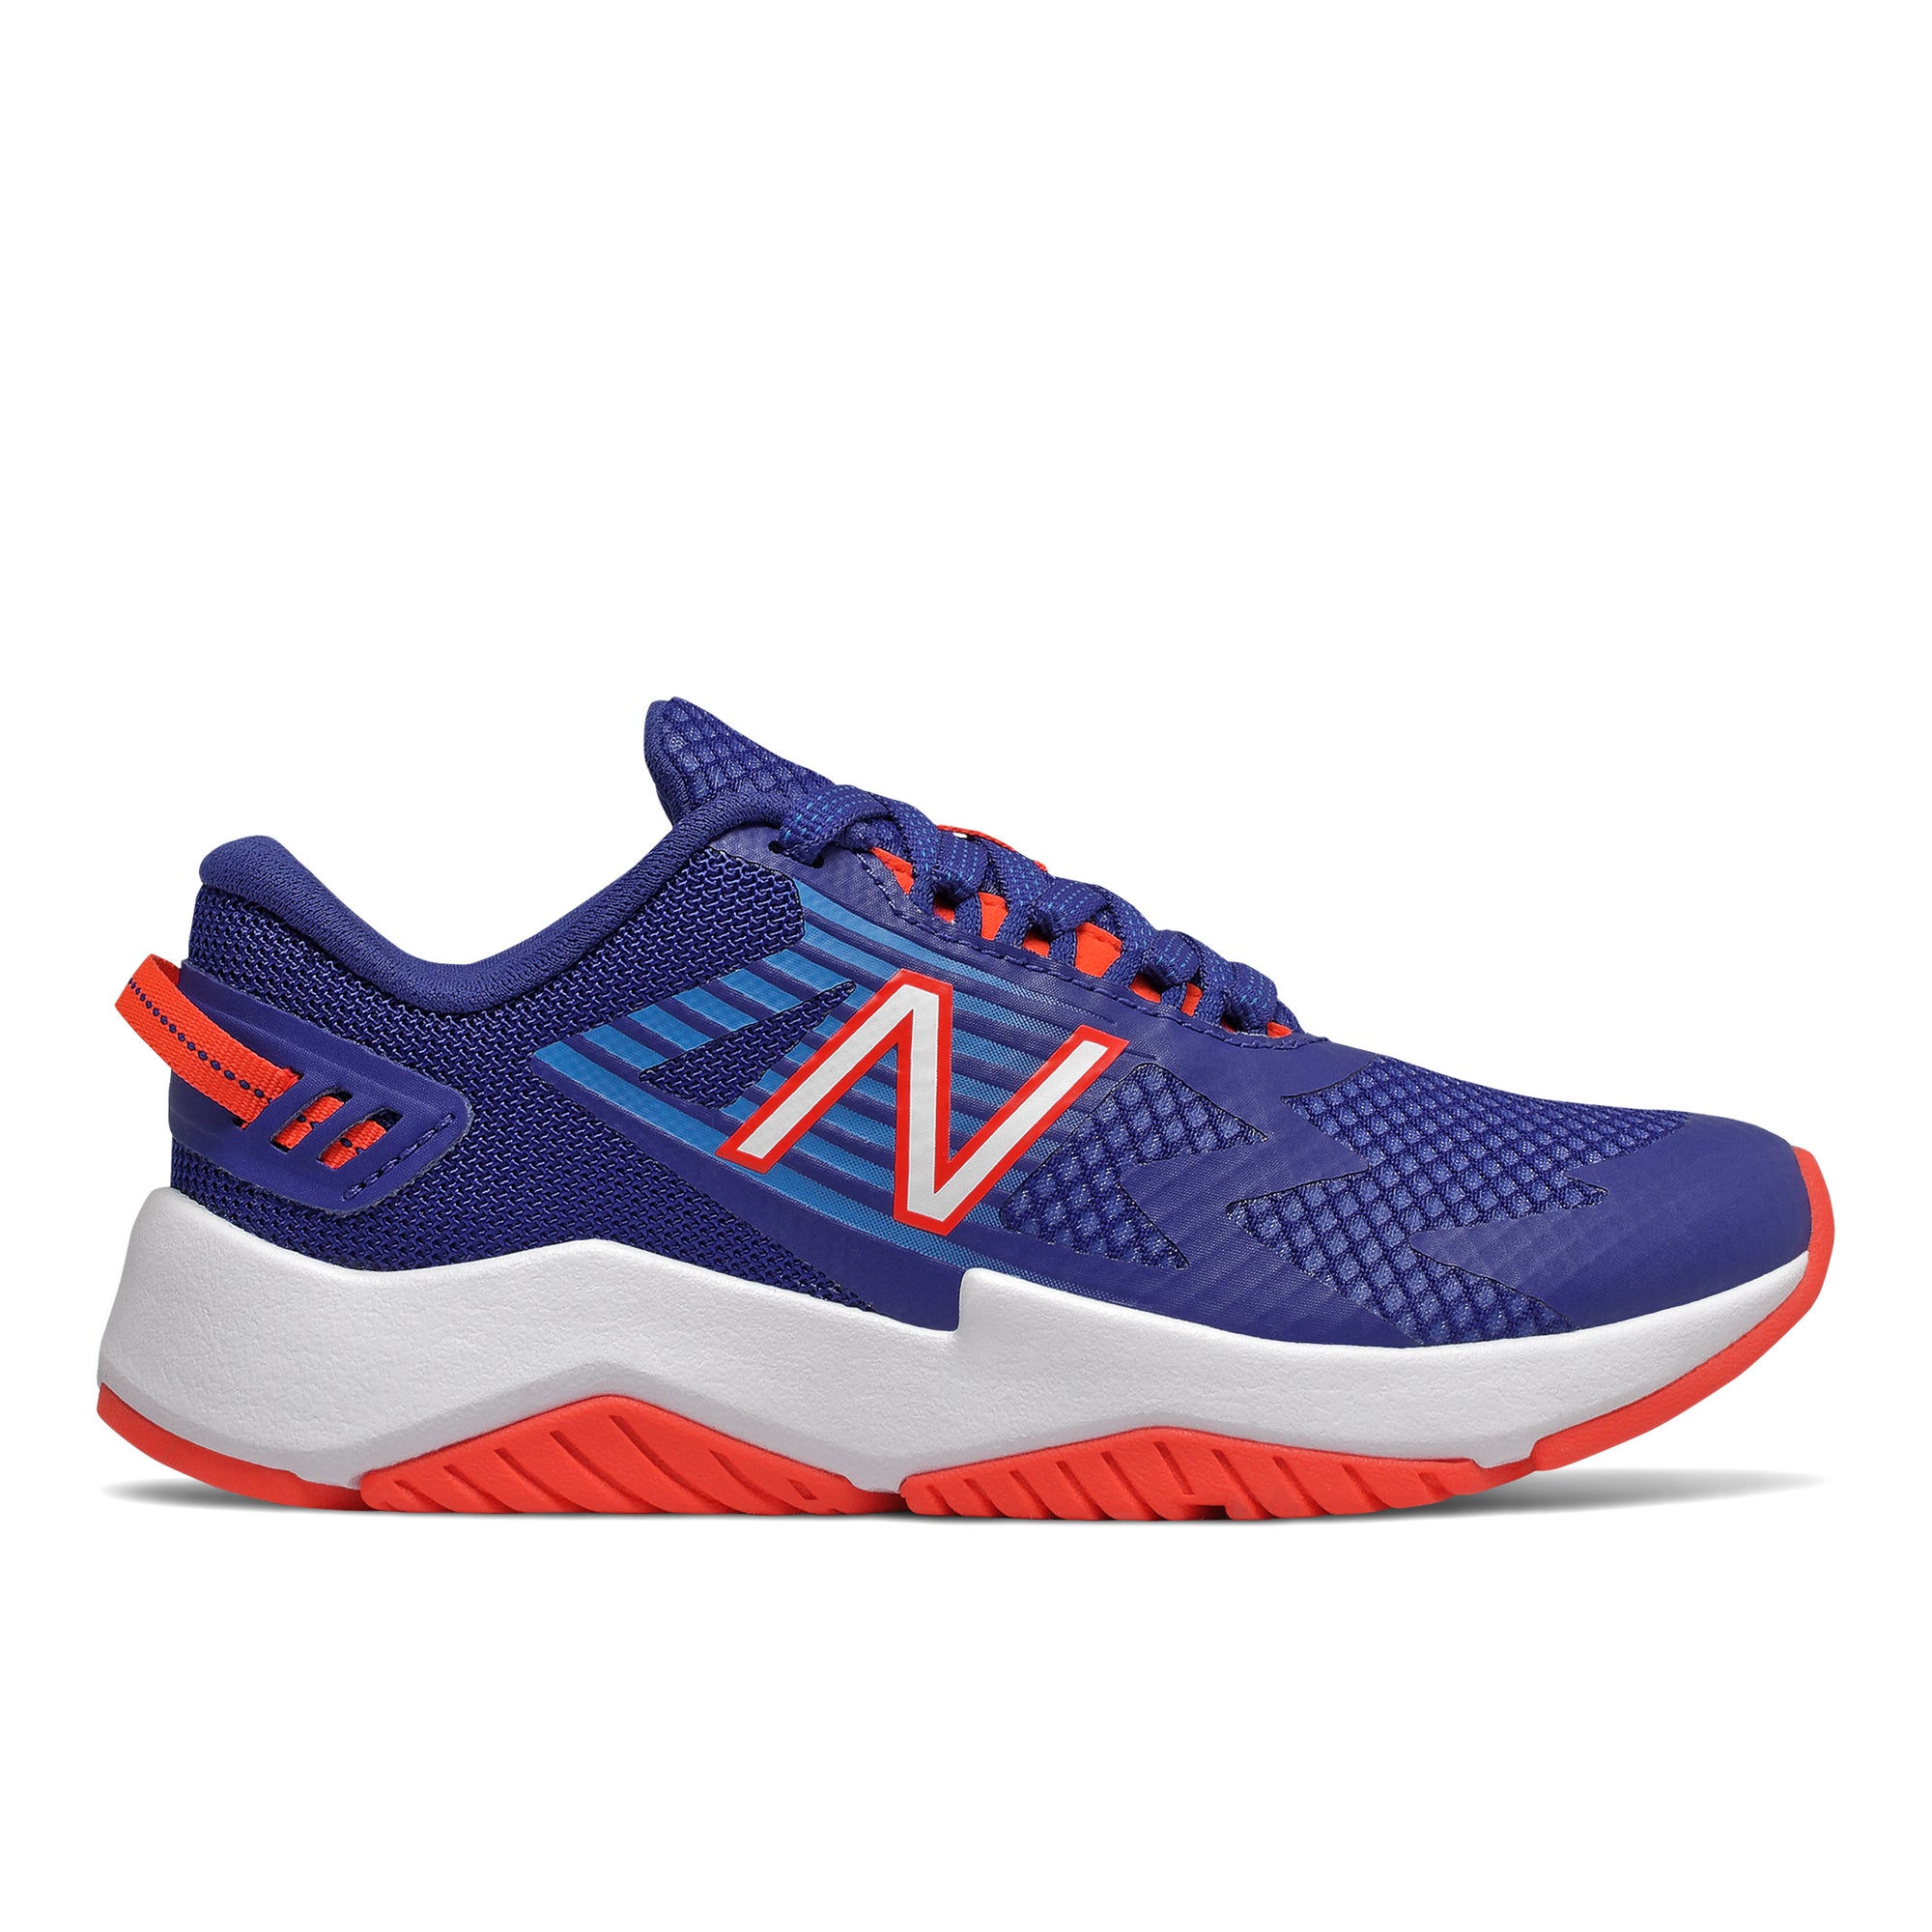 Rave Run - Marine Blue / Vision Blue / Neo Flame by New Balance - Ponseti's Shoes